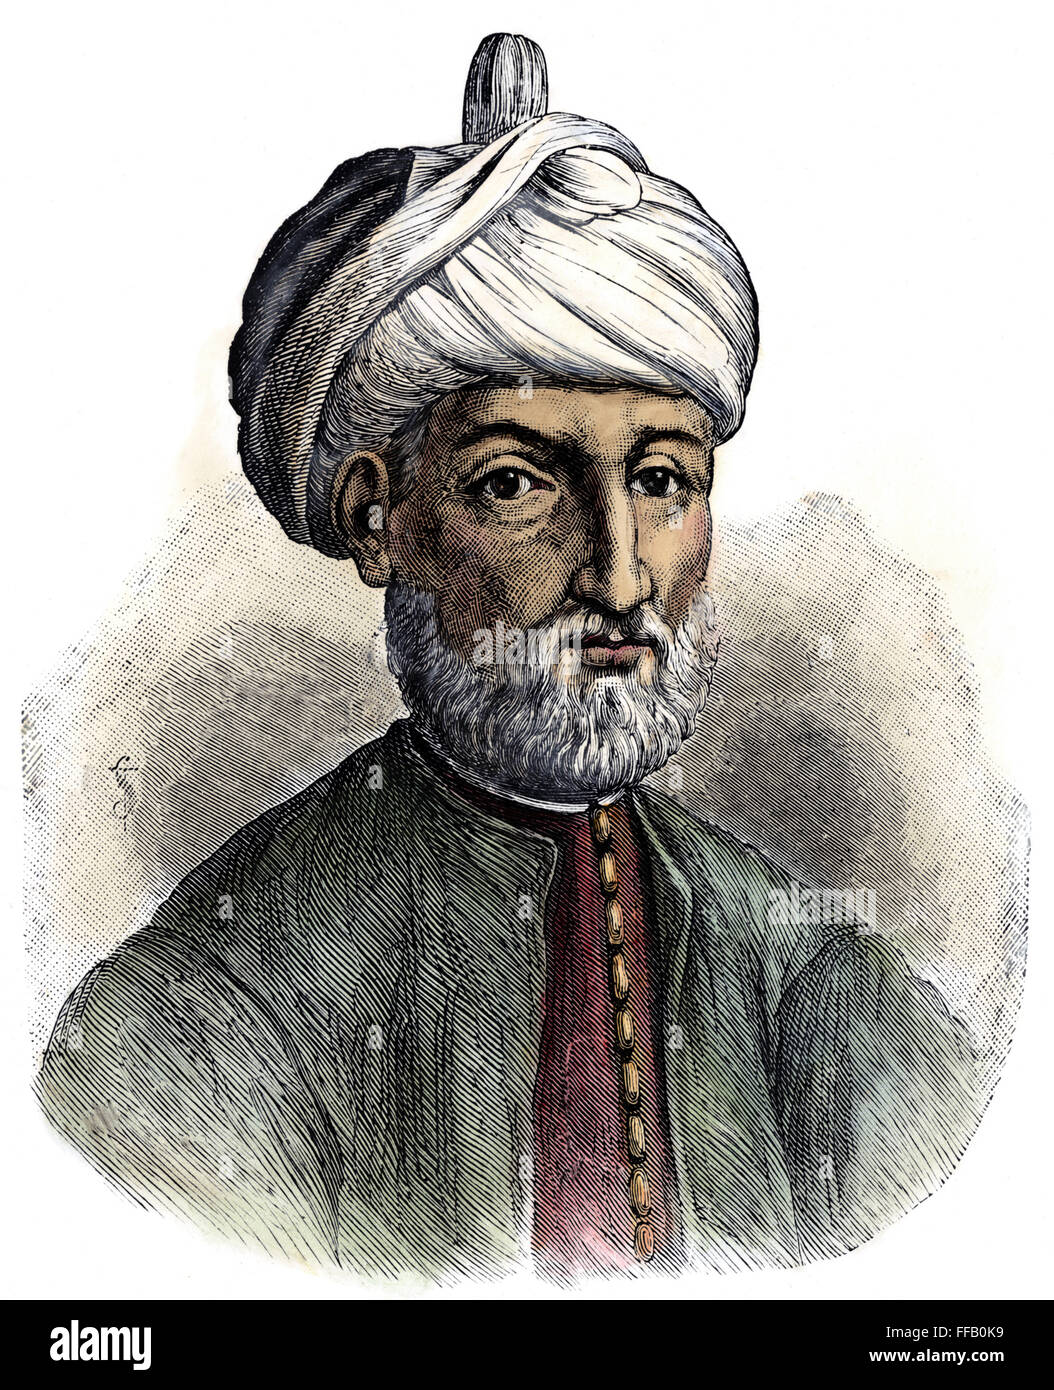 MOHAMMED (570-632). /nArabian prophet and founder of Islam. Traditional portrait: line engraving, late 19th century. Stock Photo